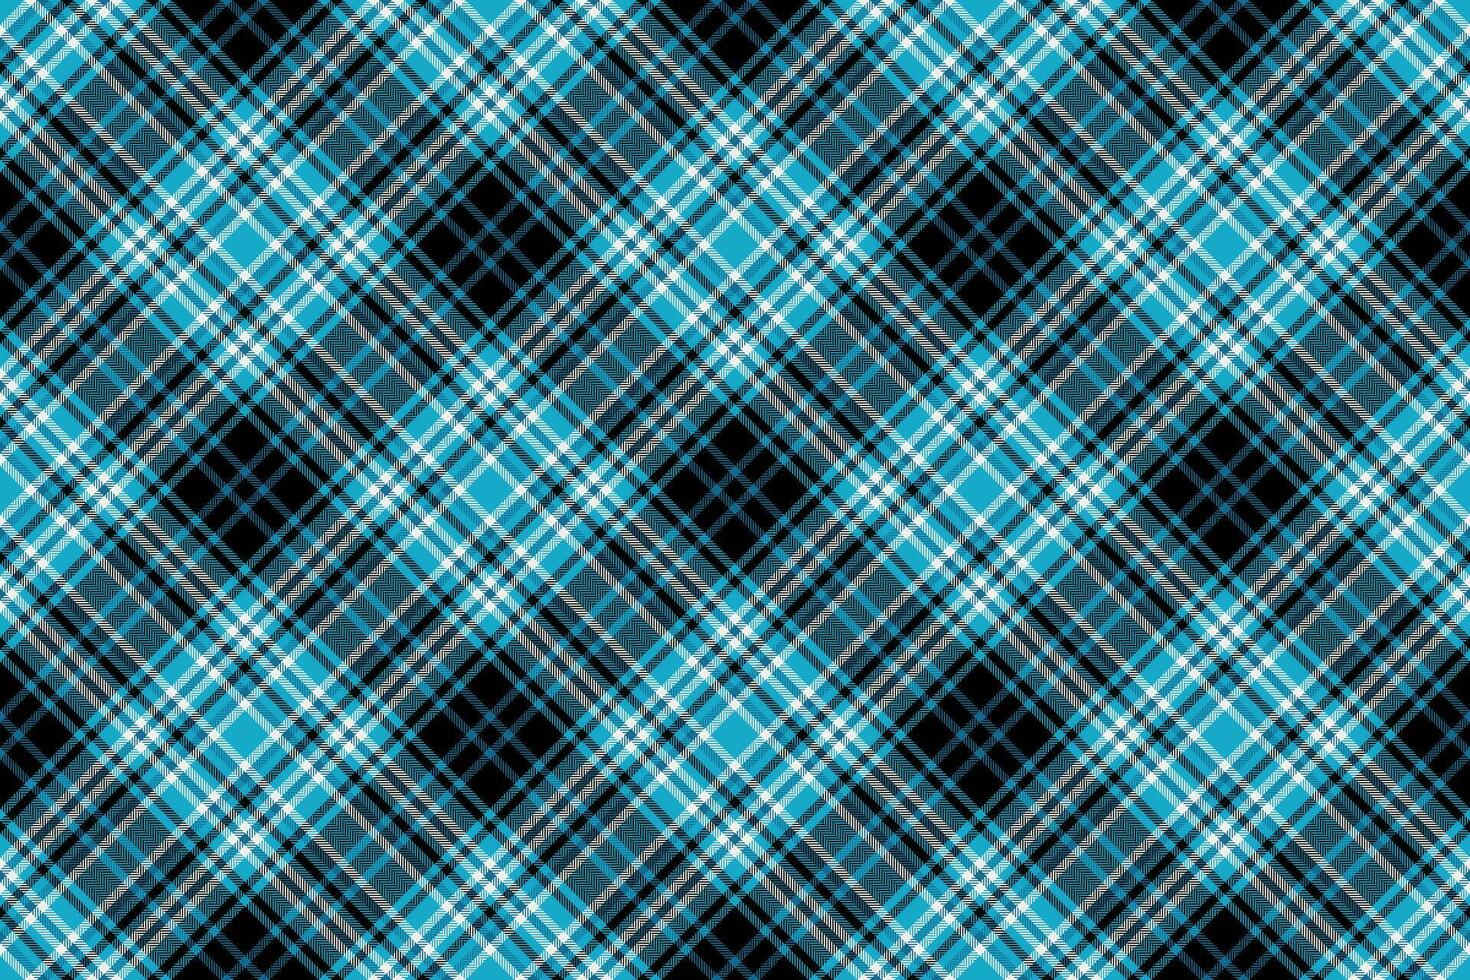 Check background pattern of seamless plaid vector with a textile tartan fabric texture.